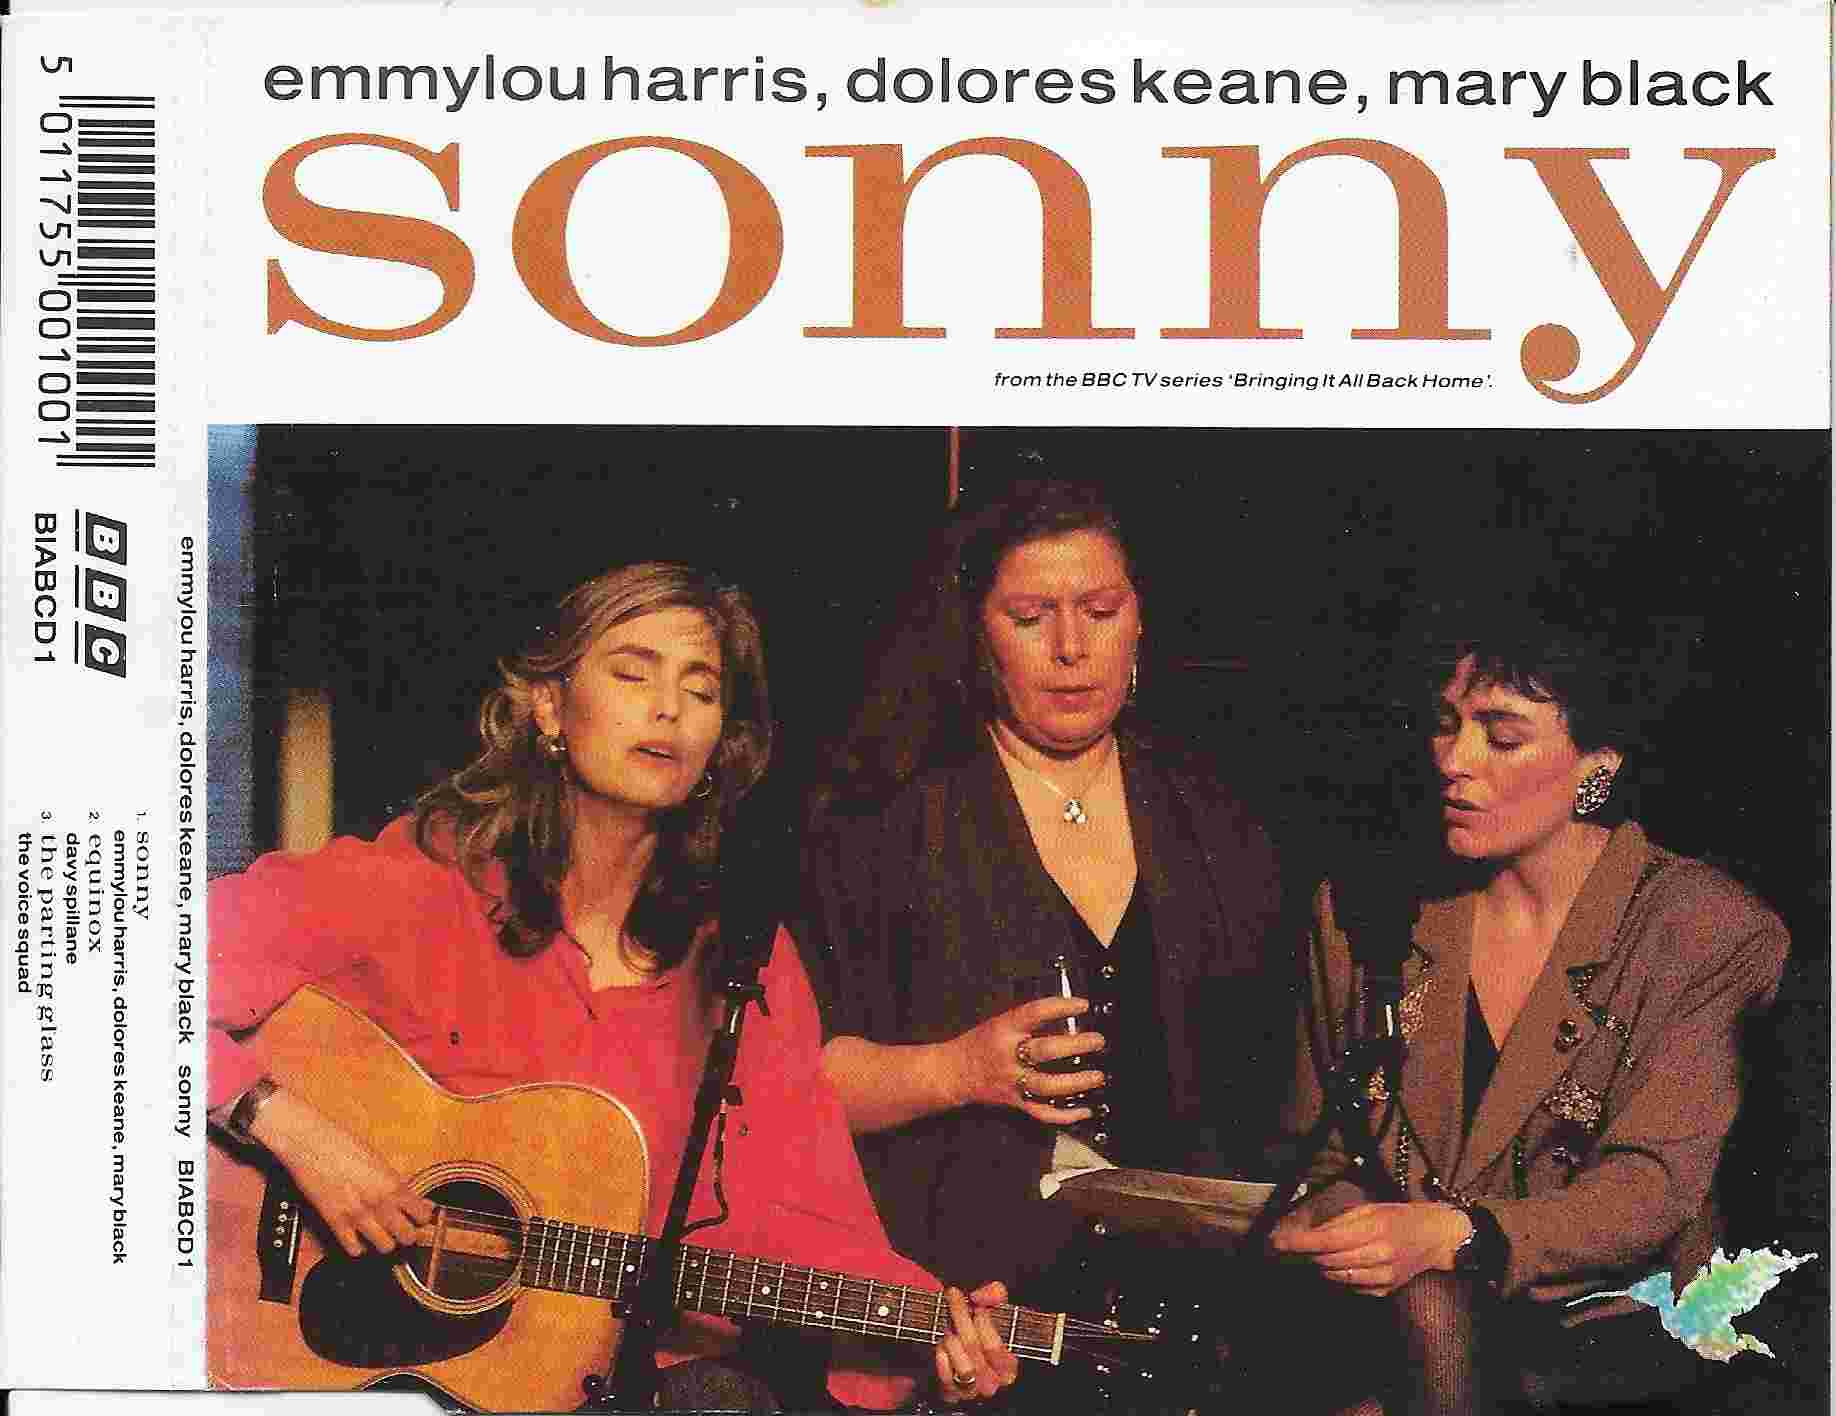 Picture of Sonny by artist Emmylou Harris / Dolores Keane / Mary Black from the BBC cdsingles - Records and Tapes library